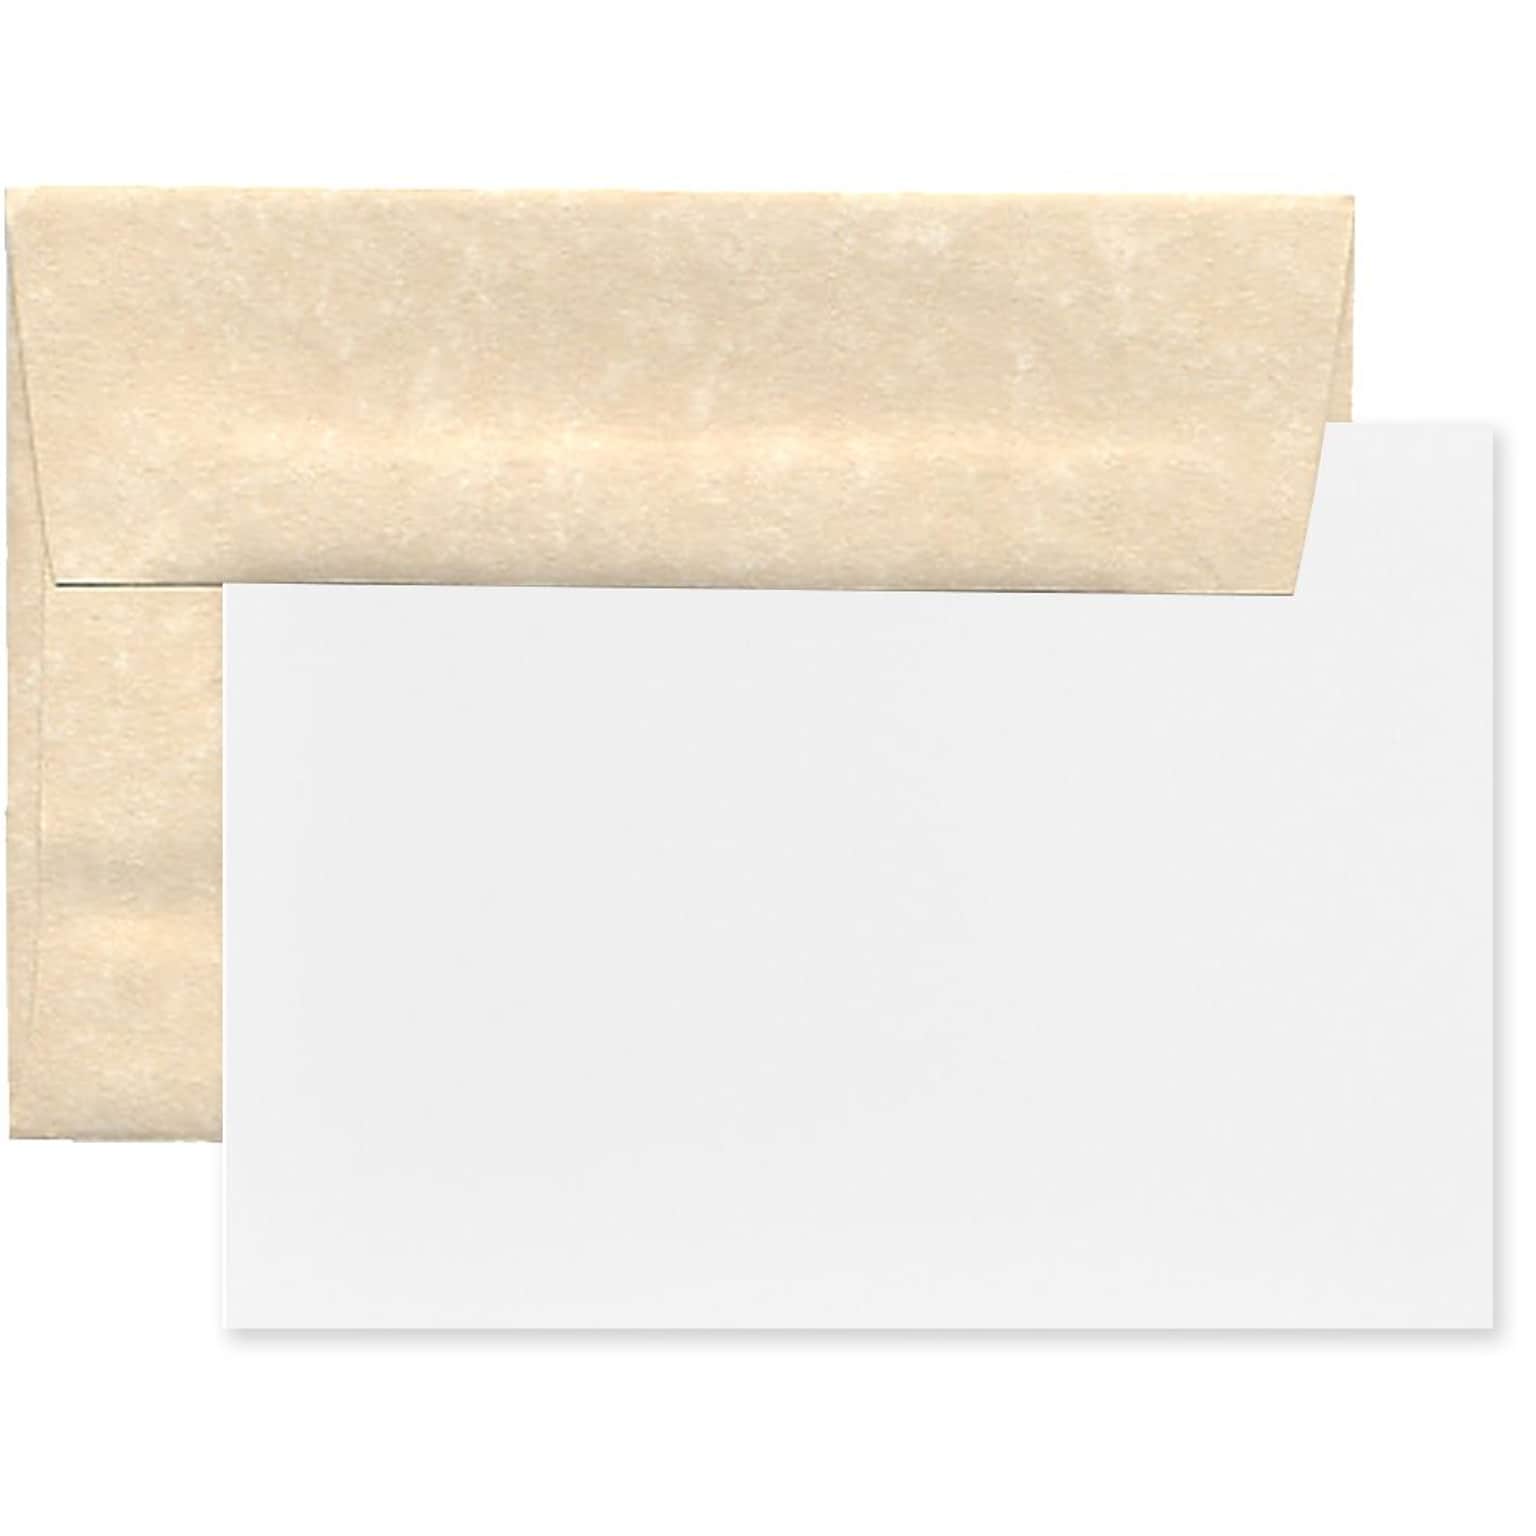 JAM Paper® Blank Greeting Cards Set, A2 Size, 4.375 x 5.75, Parchment Natural Recycled, 25/Pack (304624558)